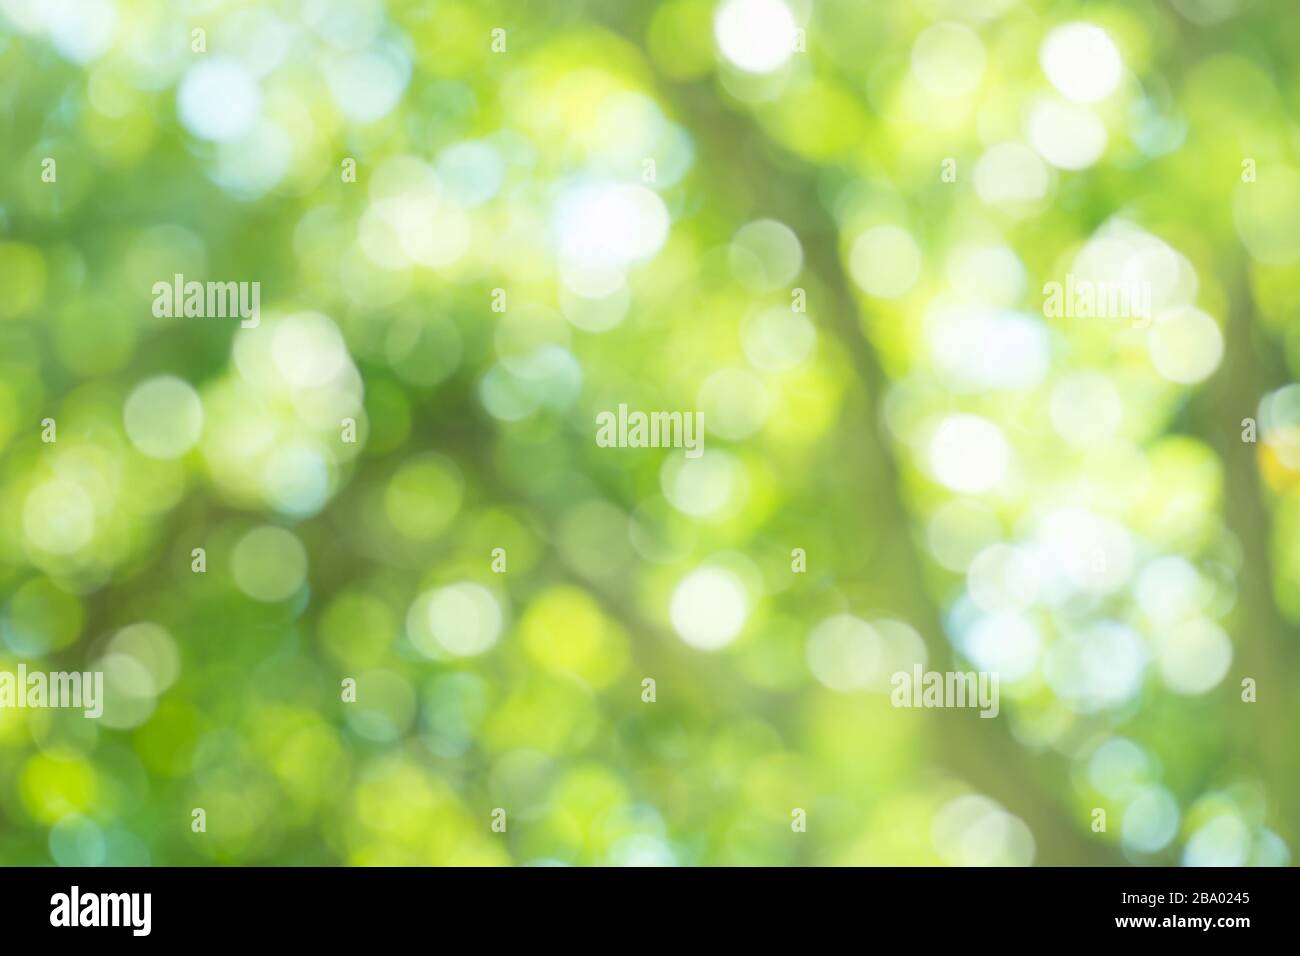 Green bokeh background. Defocused abstract green background. Blur nature green park. Sunny green nature background Stock Photo